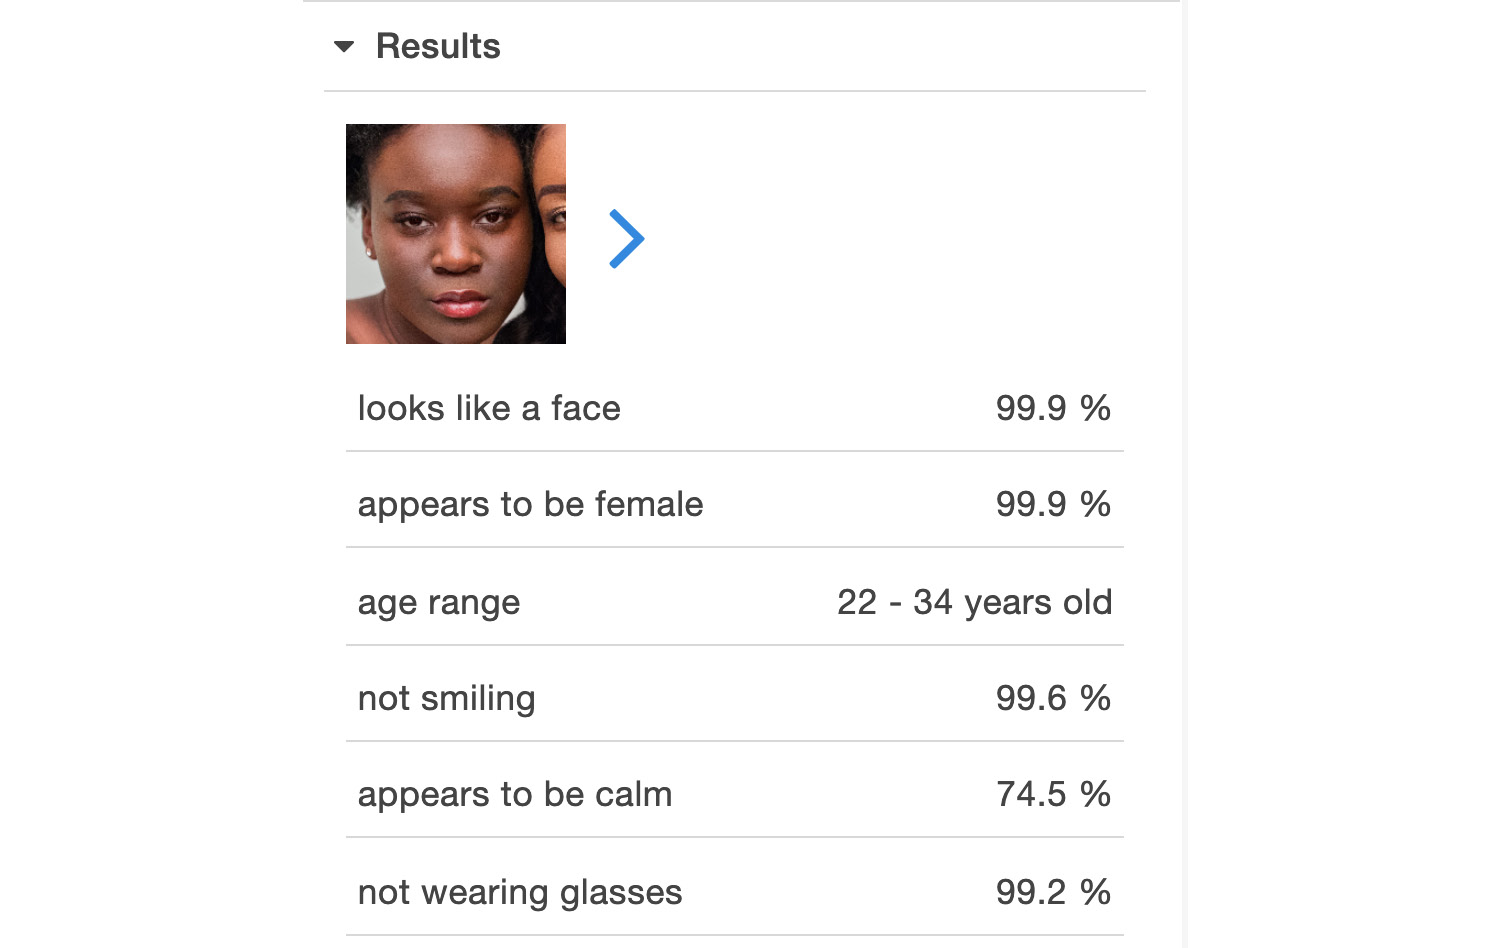 Figure 6.30: Results for the second image provided for facial analysis – second face.
